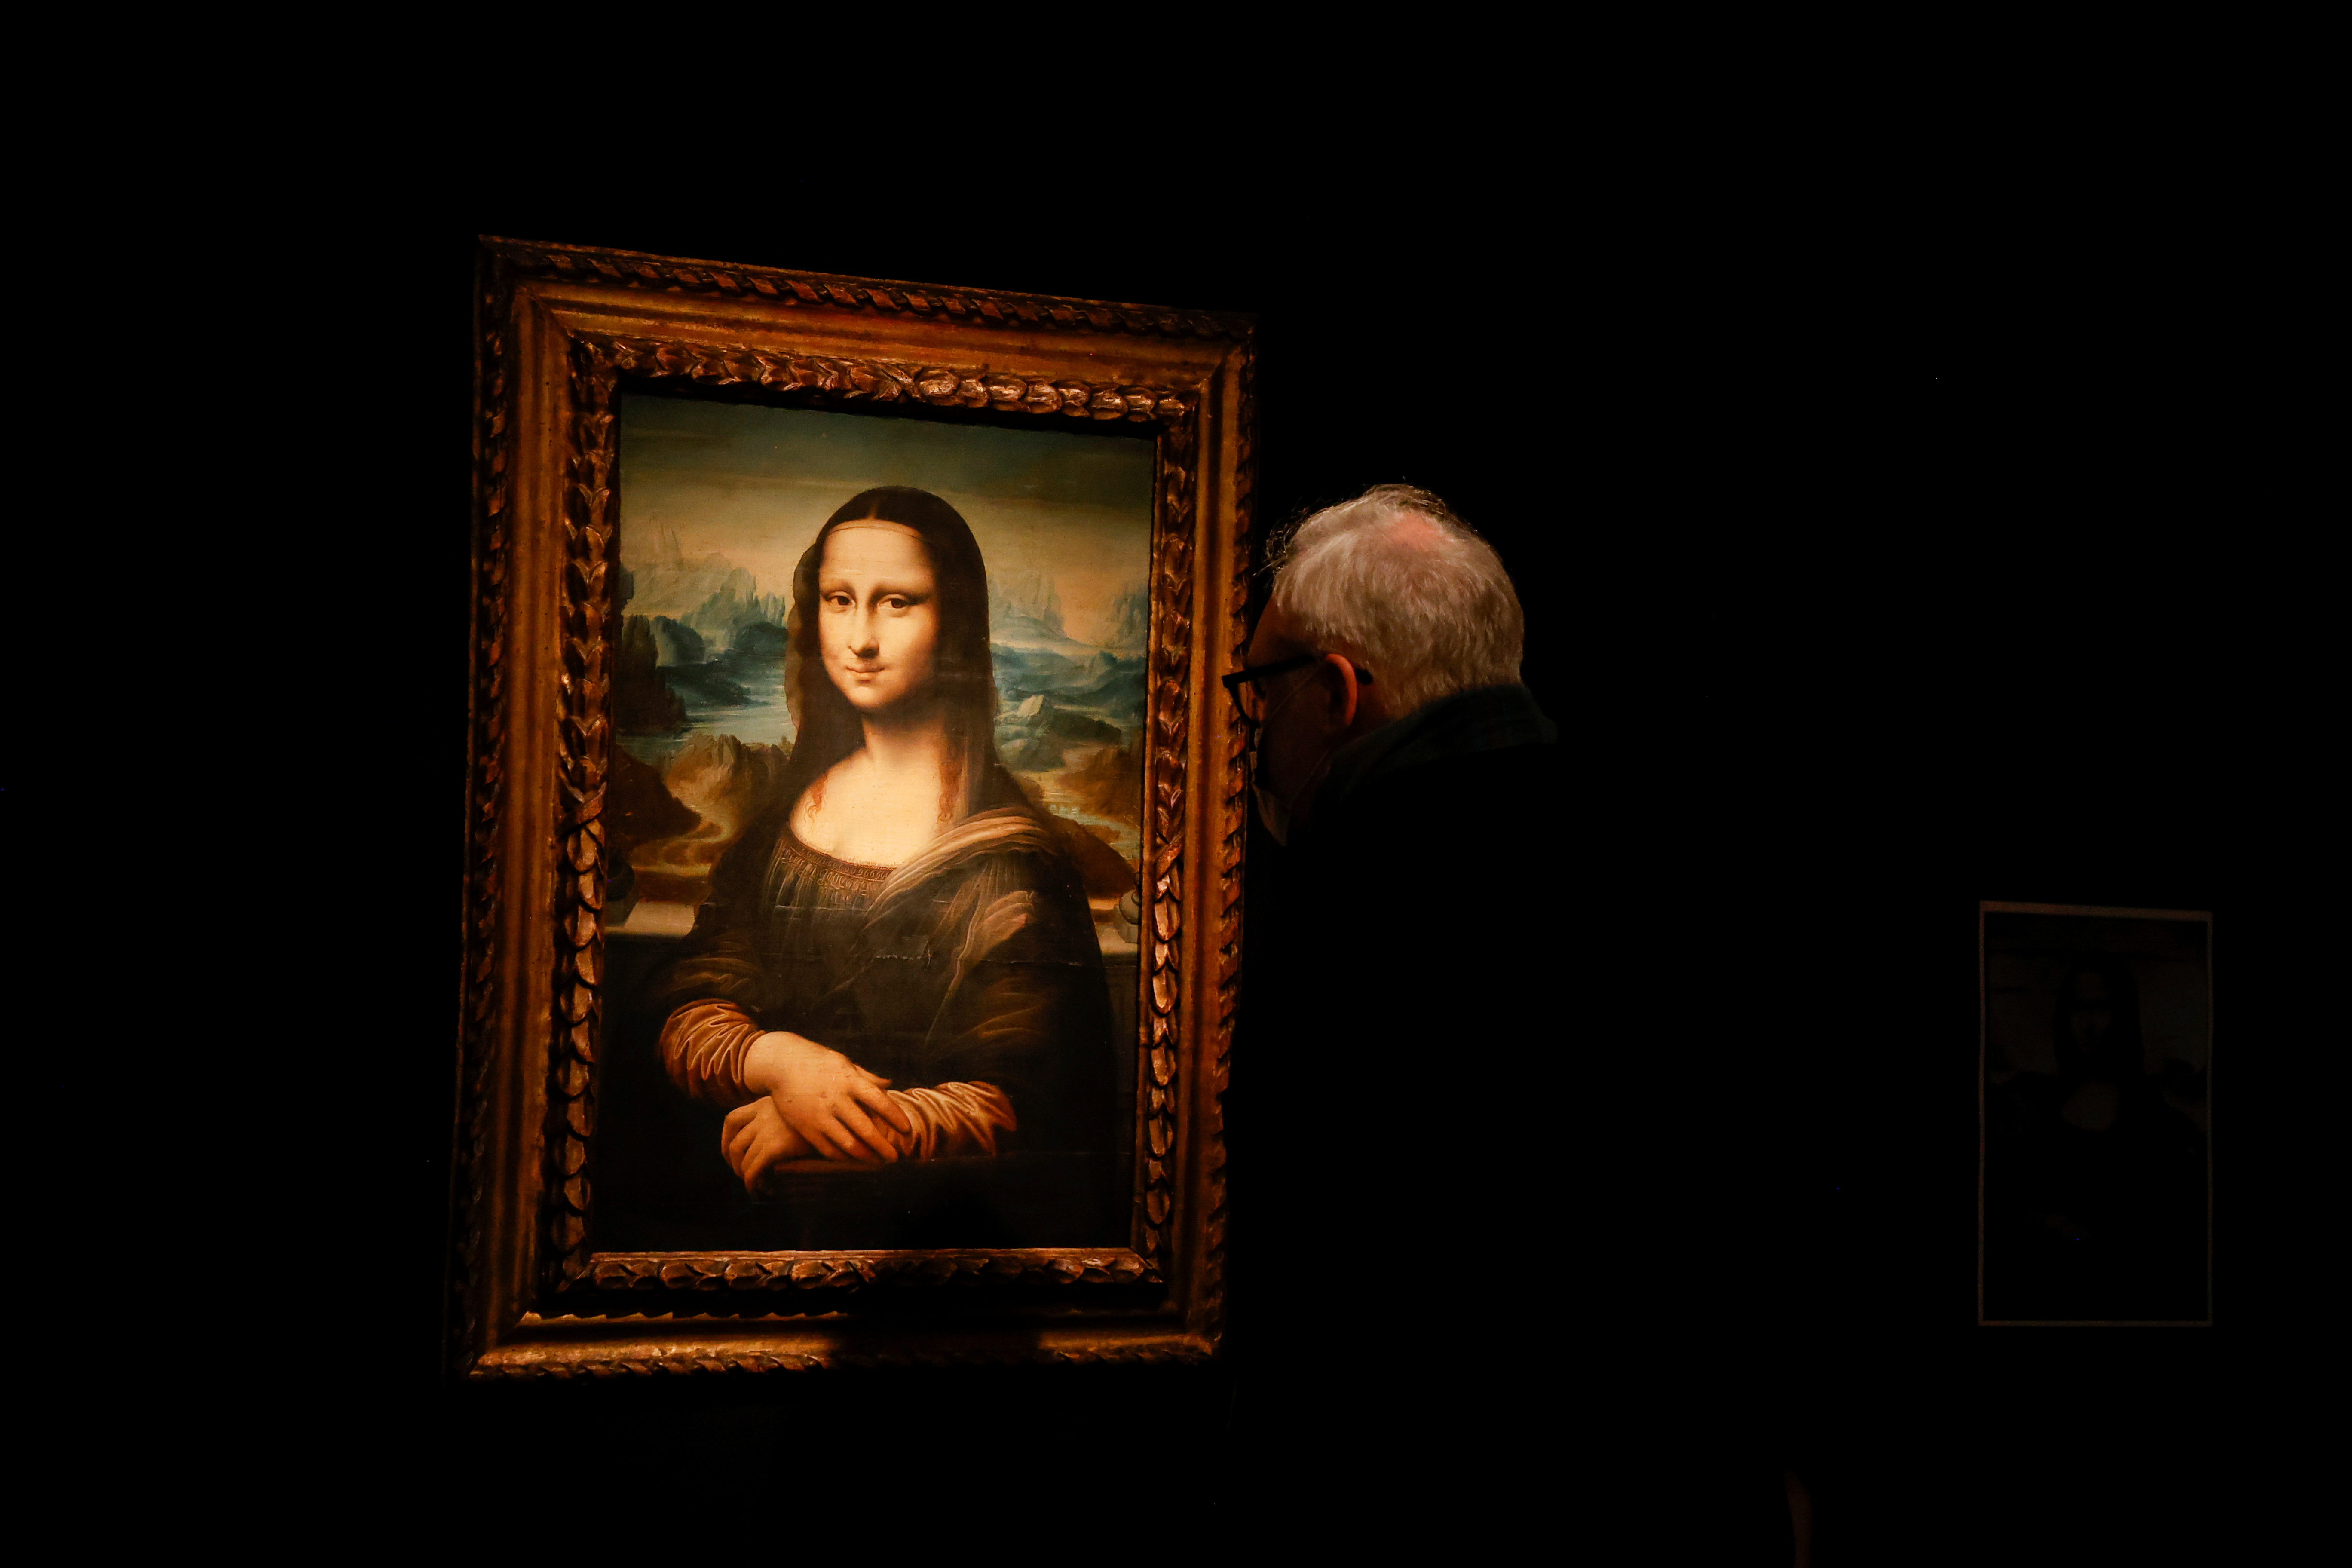 A visitor looks at a copy of the Leonardo da Vinci's Mona Lisa, which will go up for auction on November 9, at the Artcurial auction house in Paris, France, November 5, 2021. REUTERS/Noemie Olive